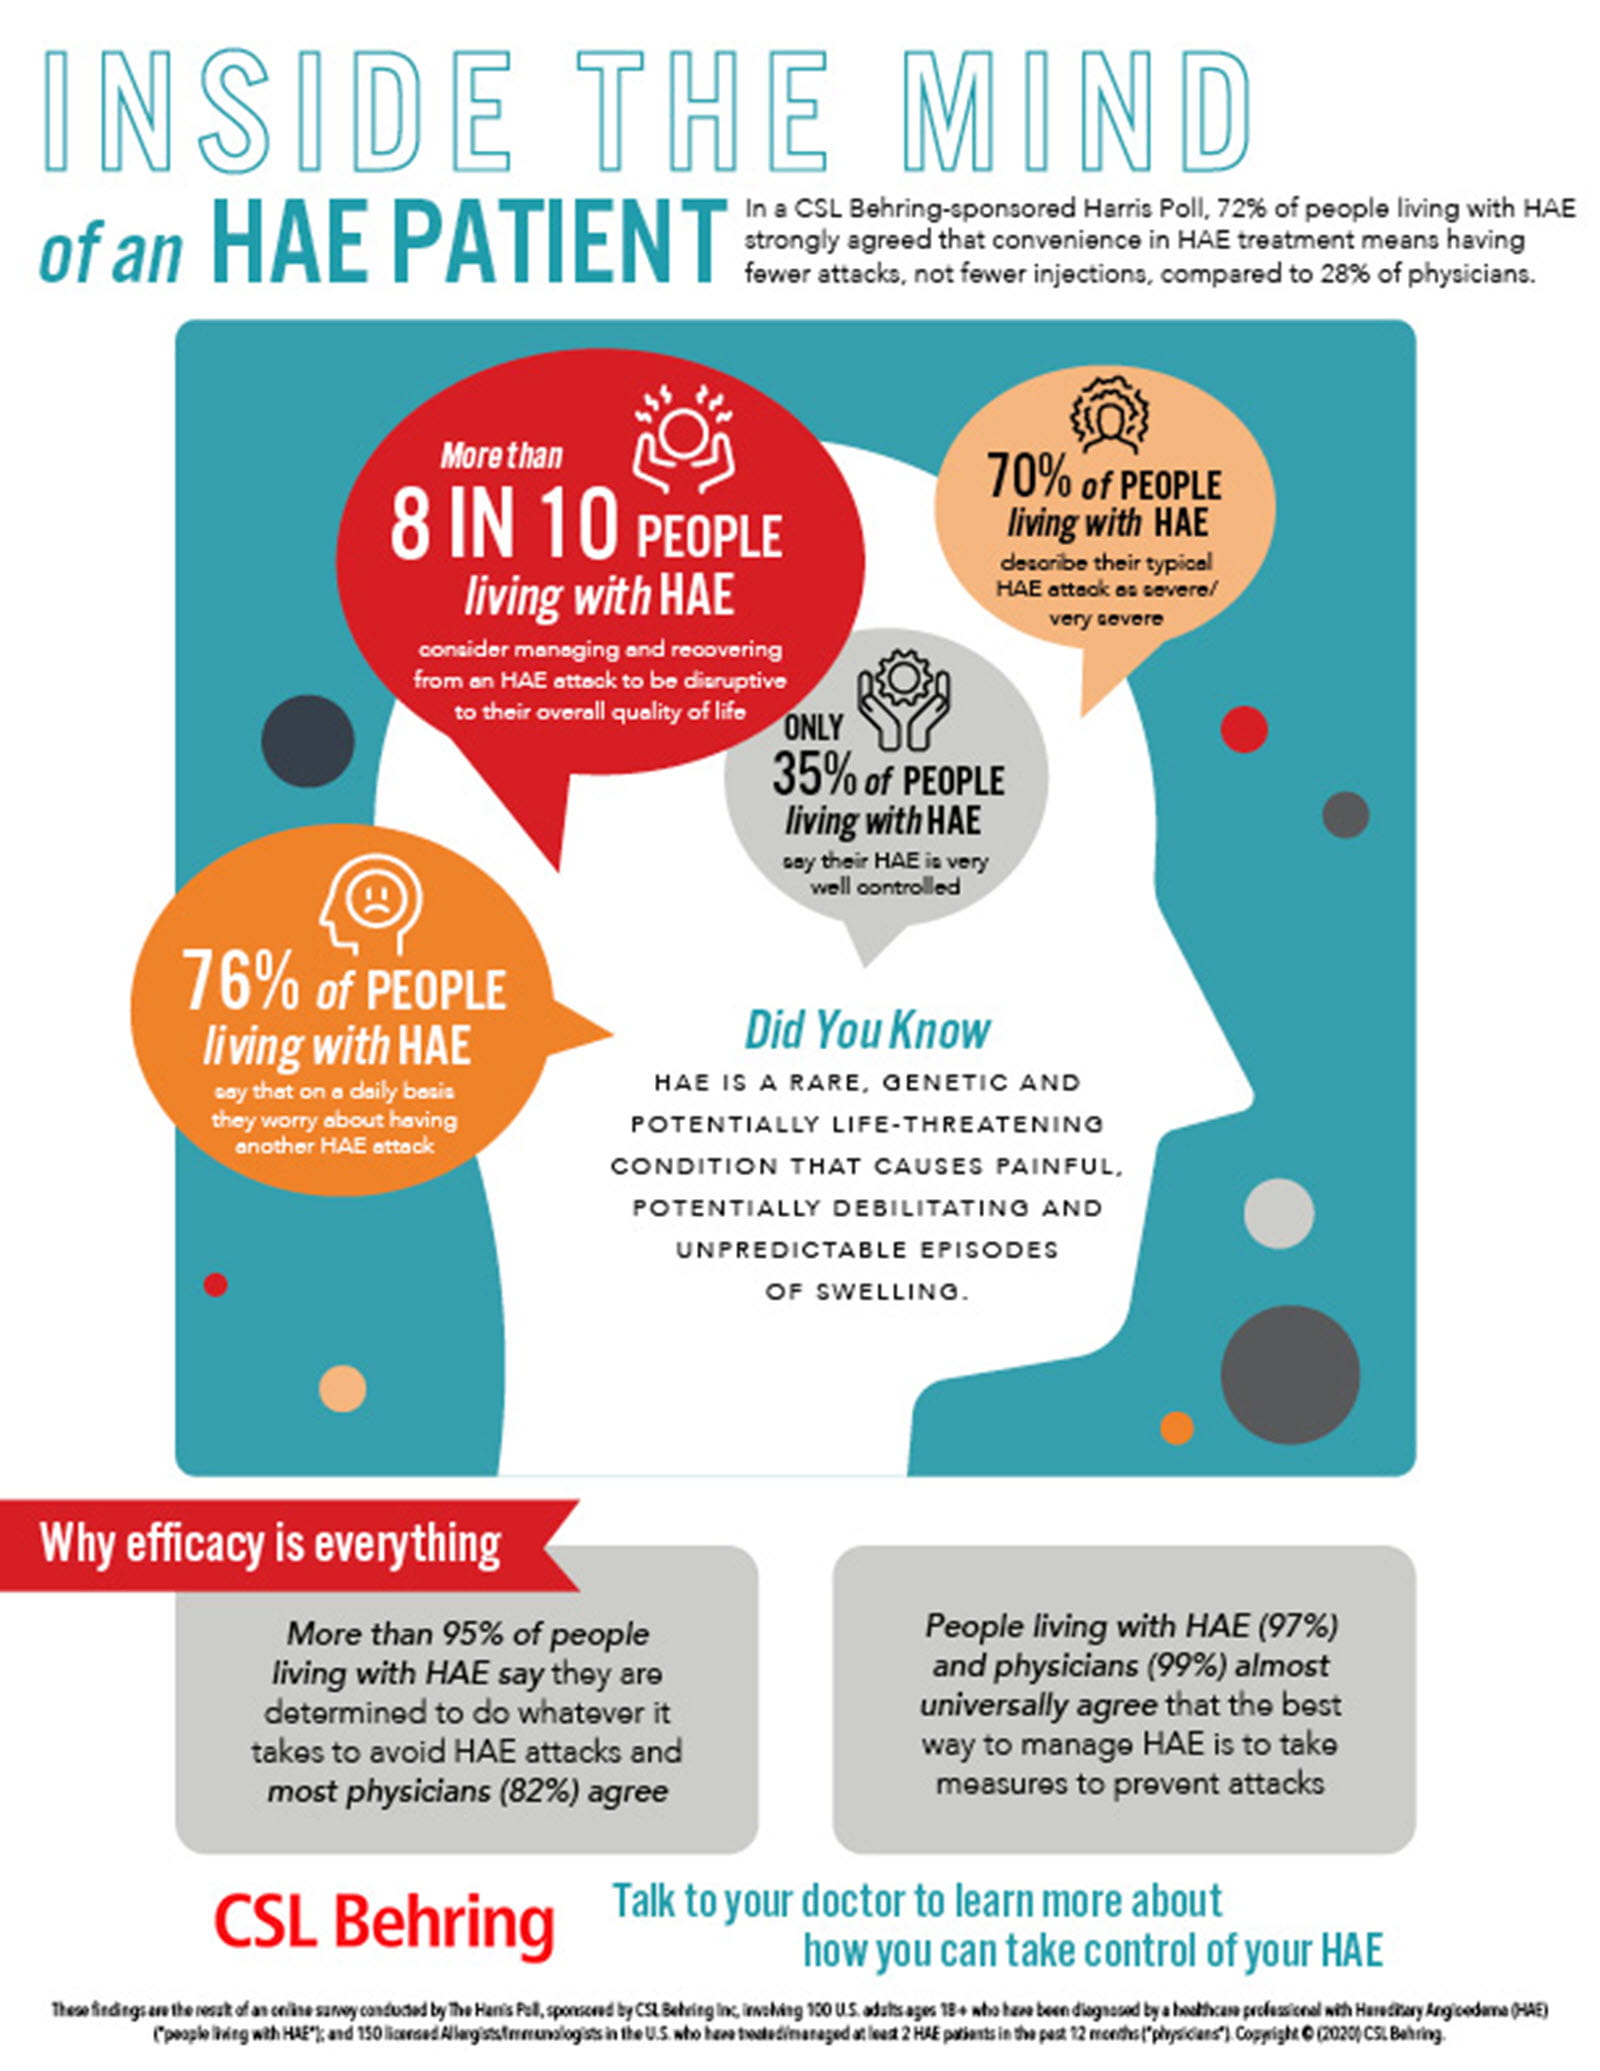 Infographic that says only 35% of HAE patients say their attacks are well controlled